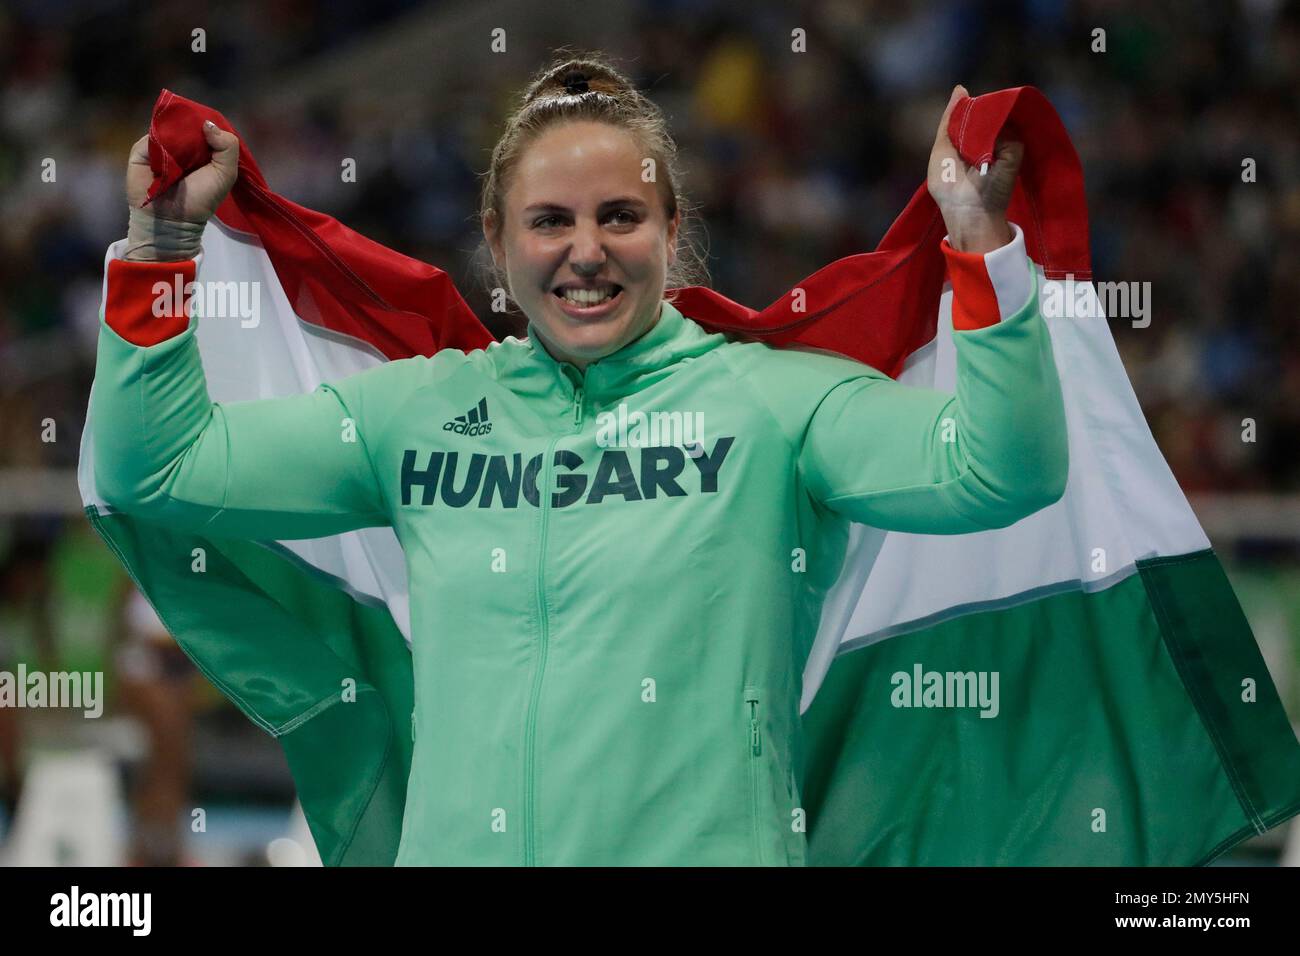 Hungary's Anita Marton wins the bronze medal in the women's shot put during  the athletics competitions of the 2016 Summer Olympics at the Olympic  stadium in Rio de Janeiro, Brazil, Friday, Aug.